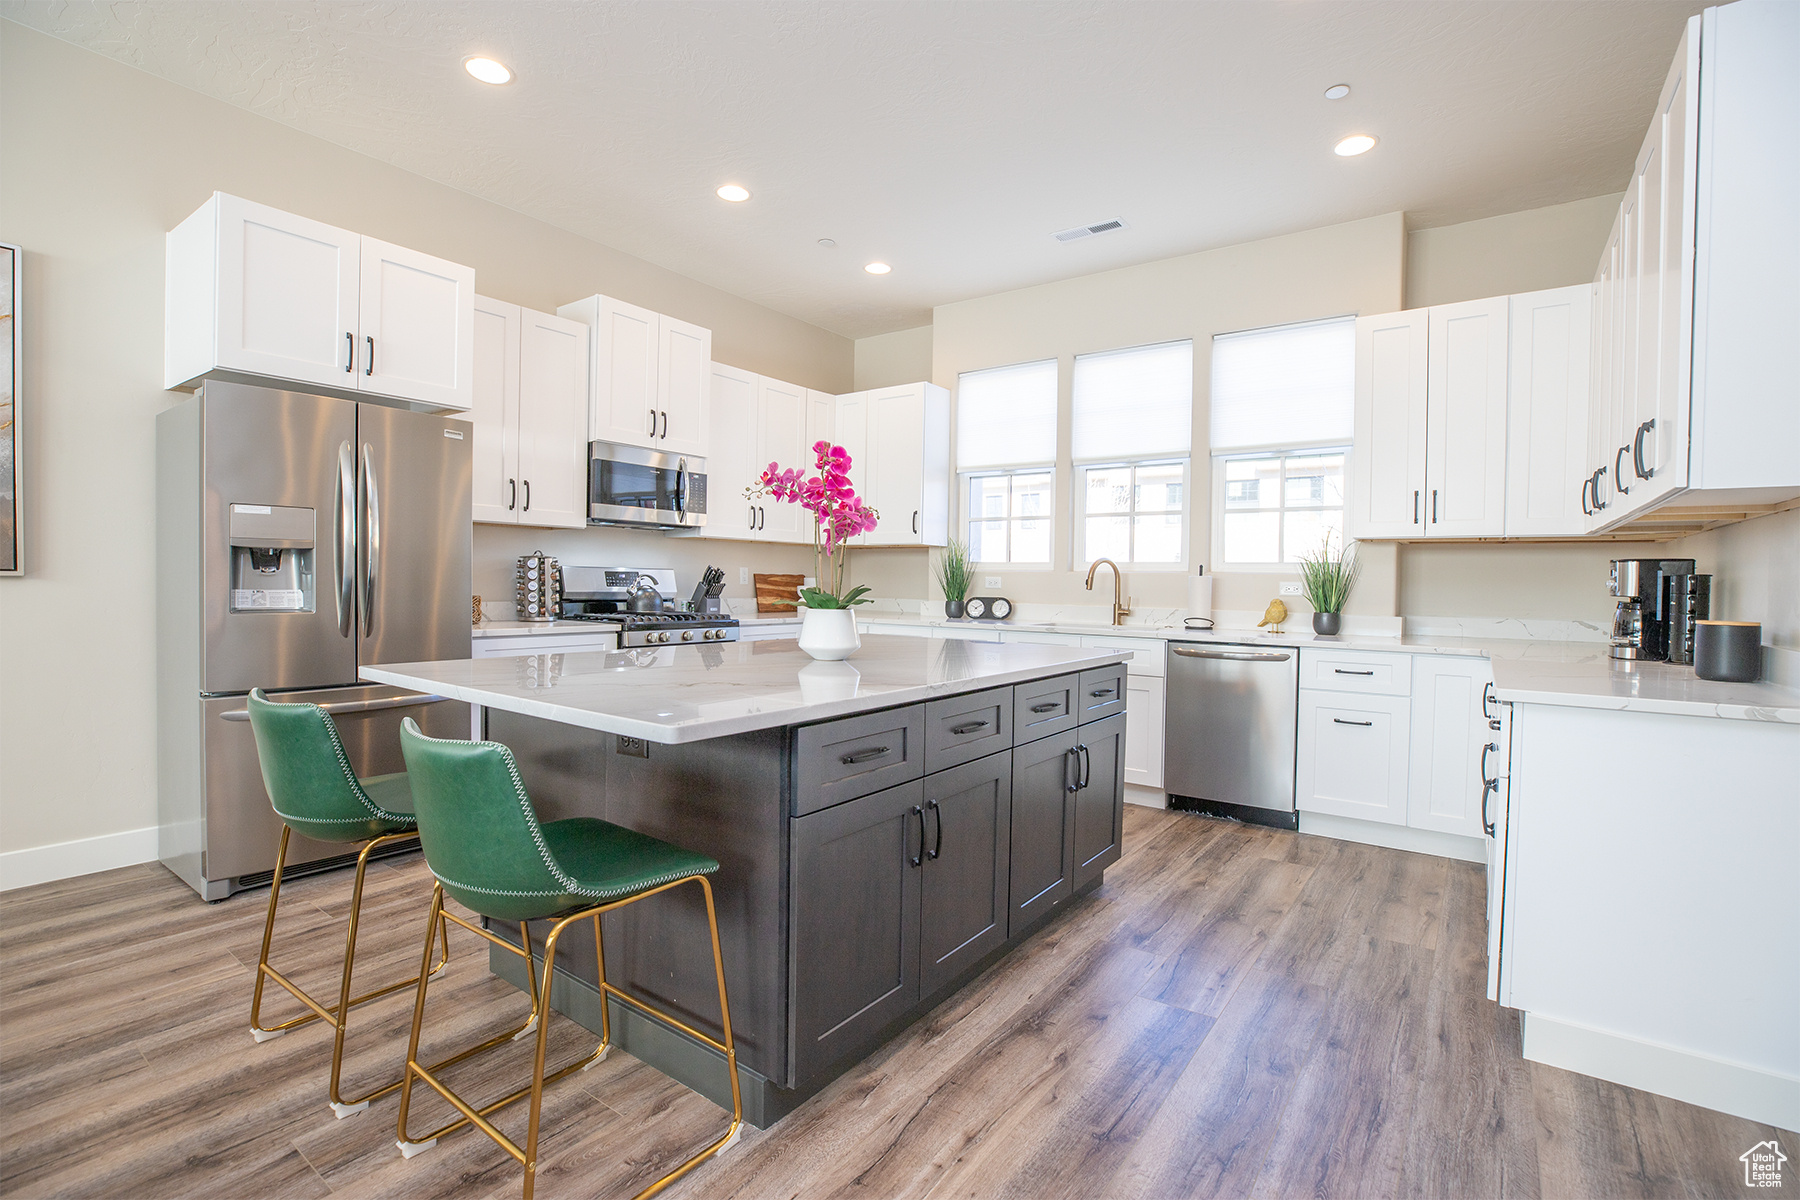 Kitchen featuring a breakfast bar, light hardwood / wood-style floors, appliances with stainless steel finishes, a kitchen island, and white cabinetry